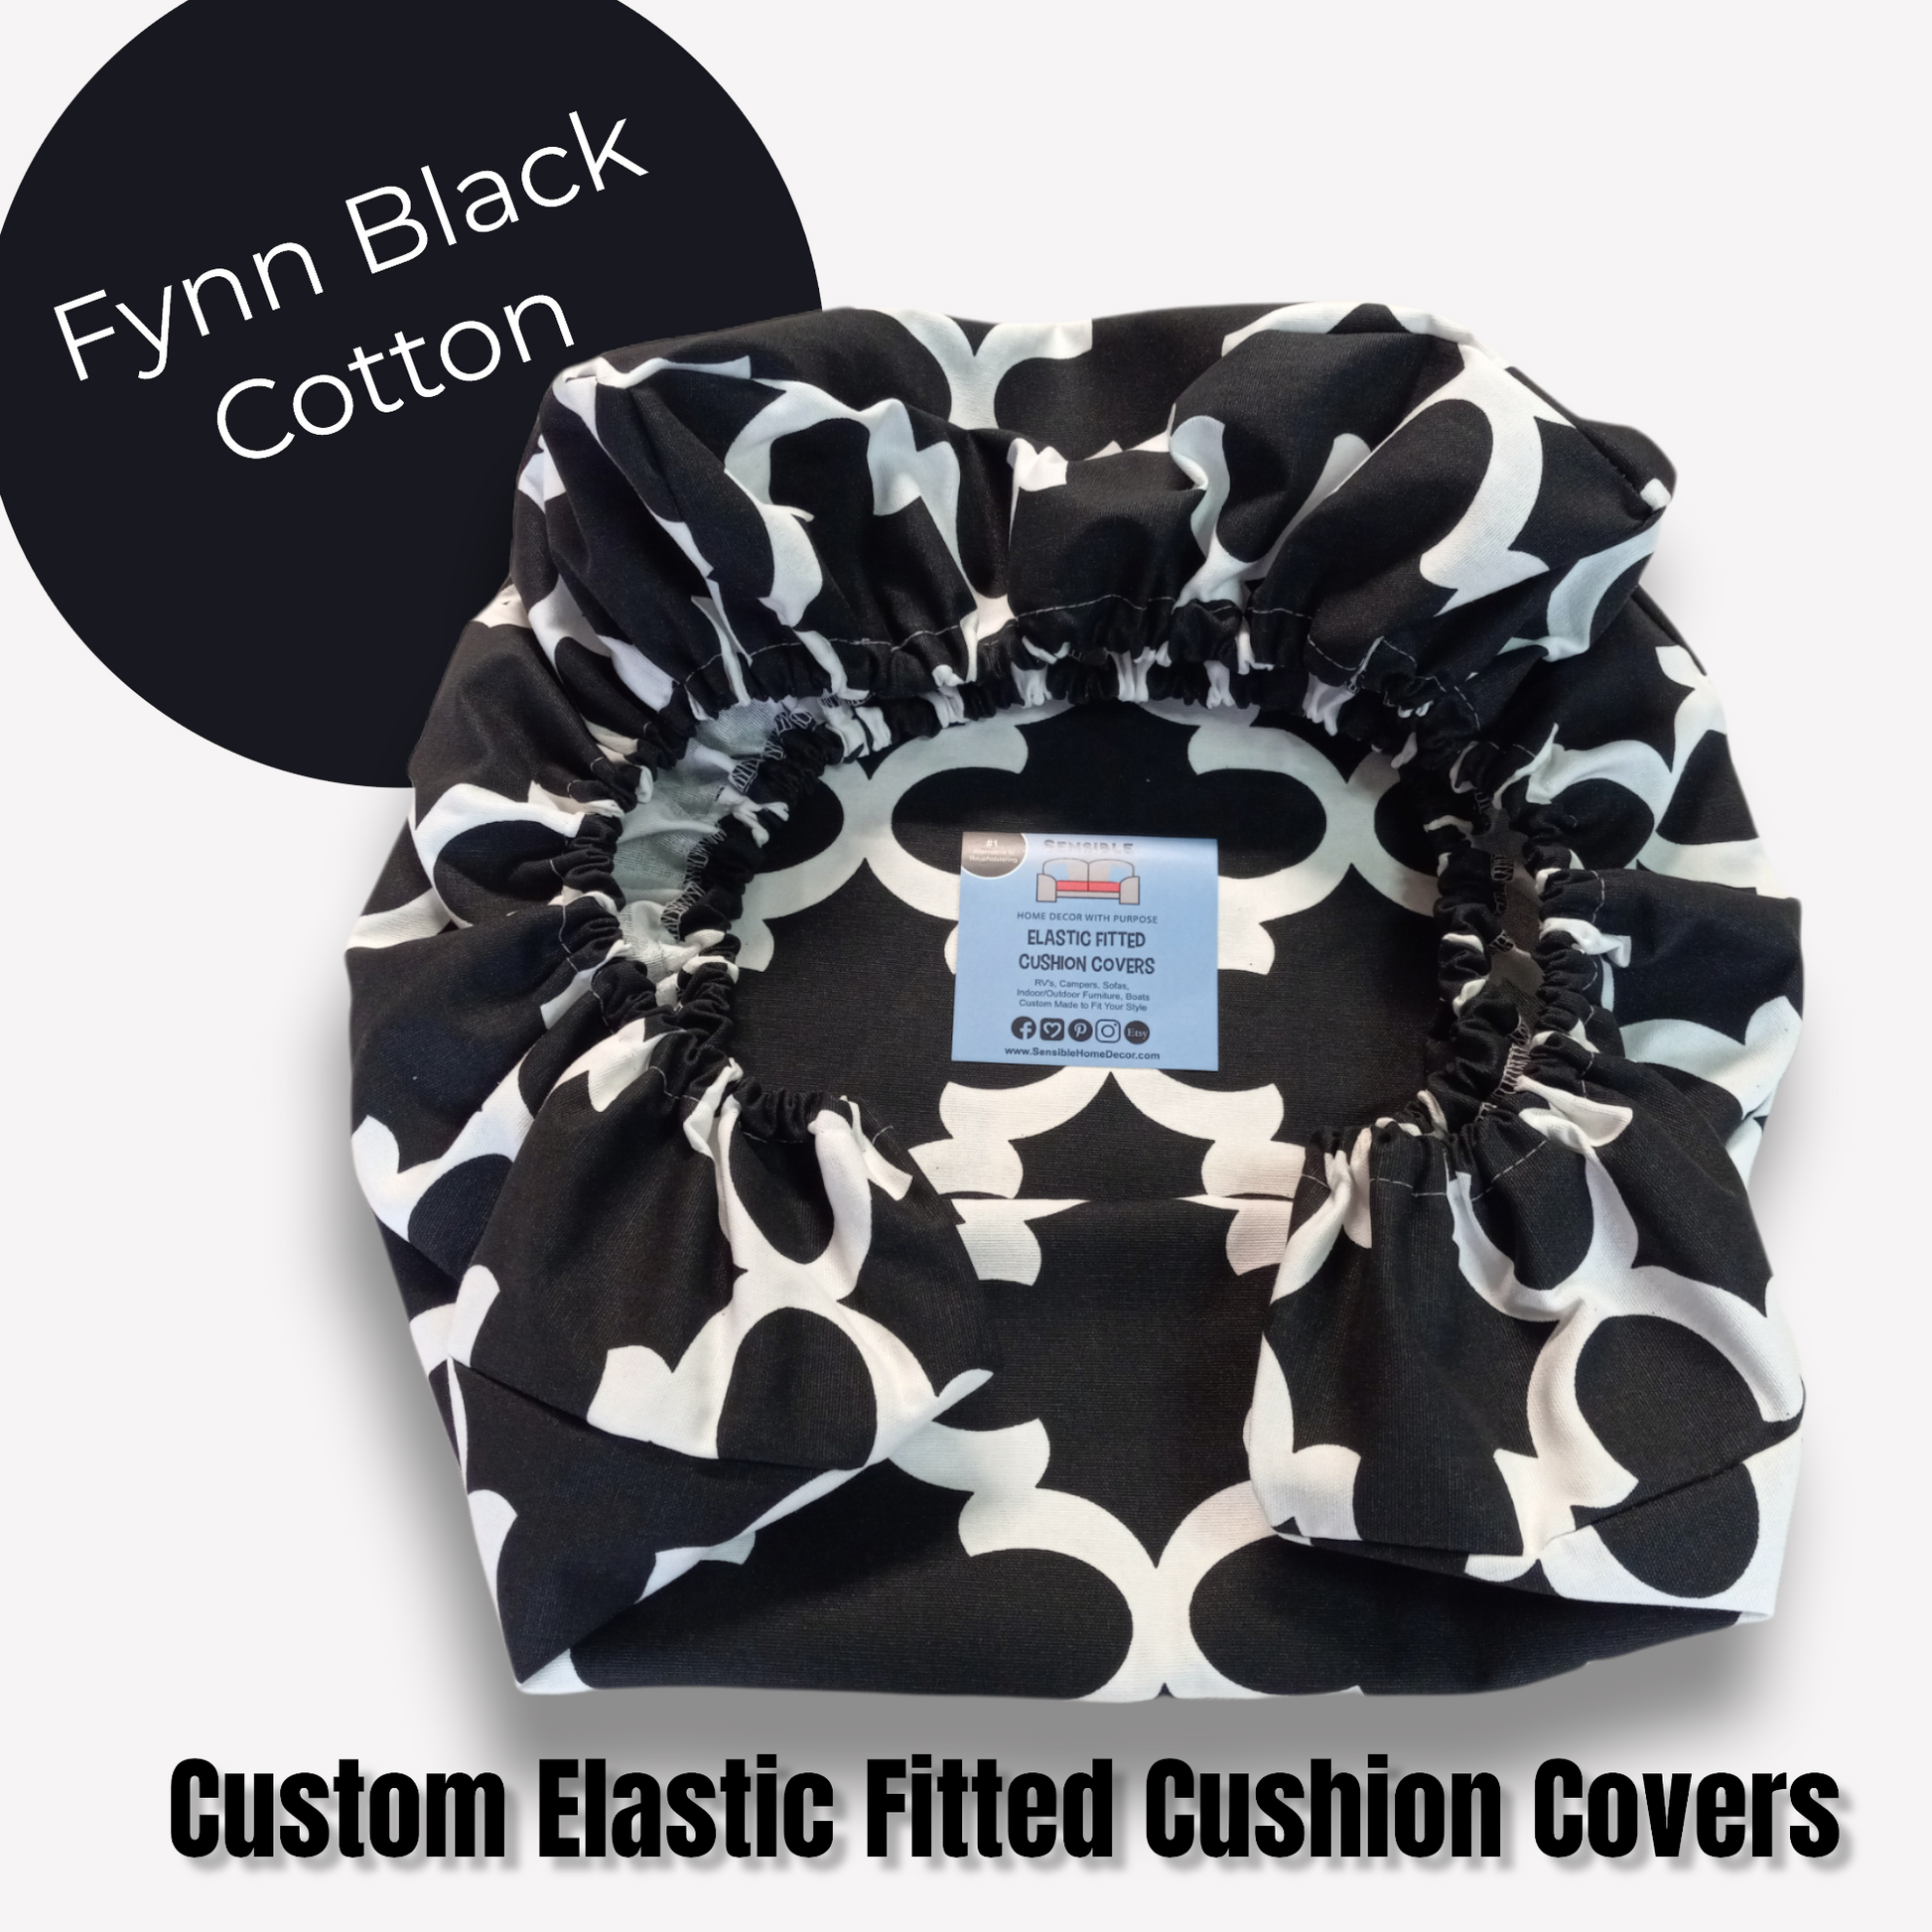 Fynn Cotton Fabric for Custom Elastic Fitted Cushion Cover - Choice of Color